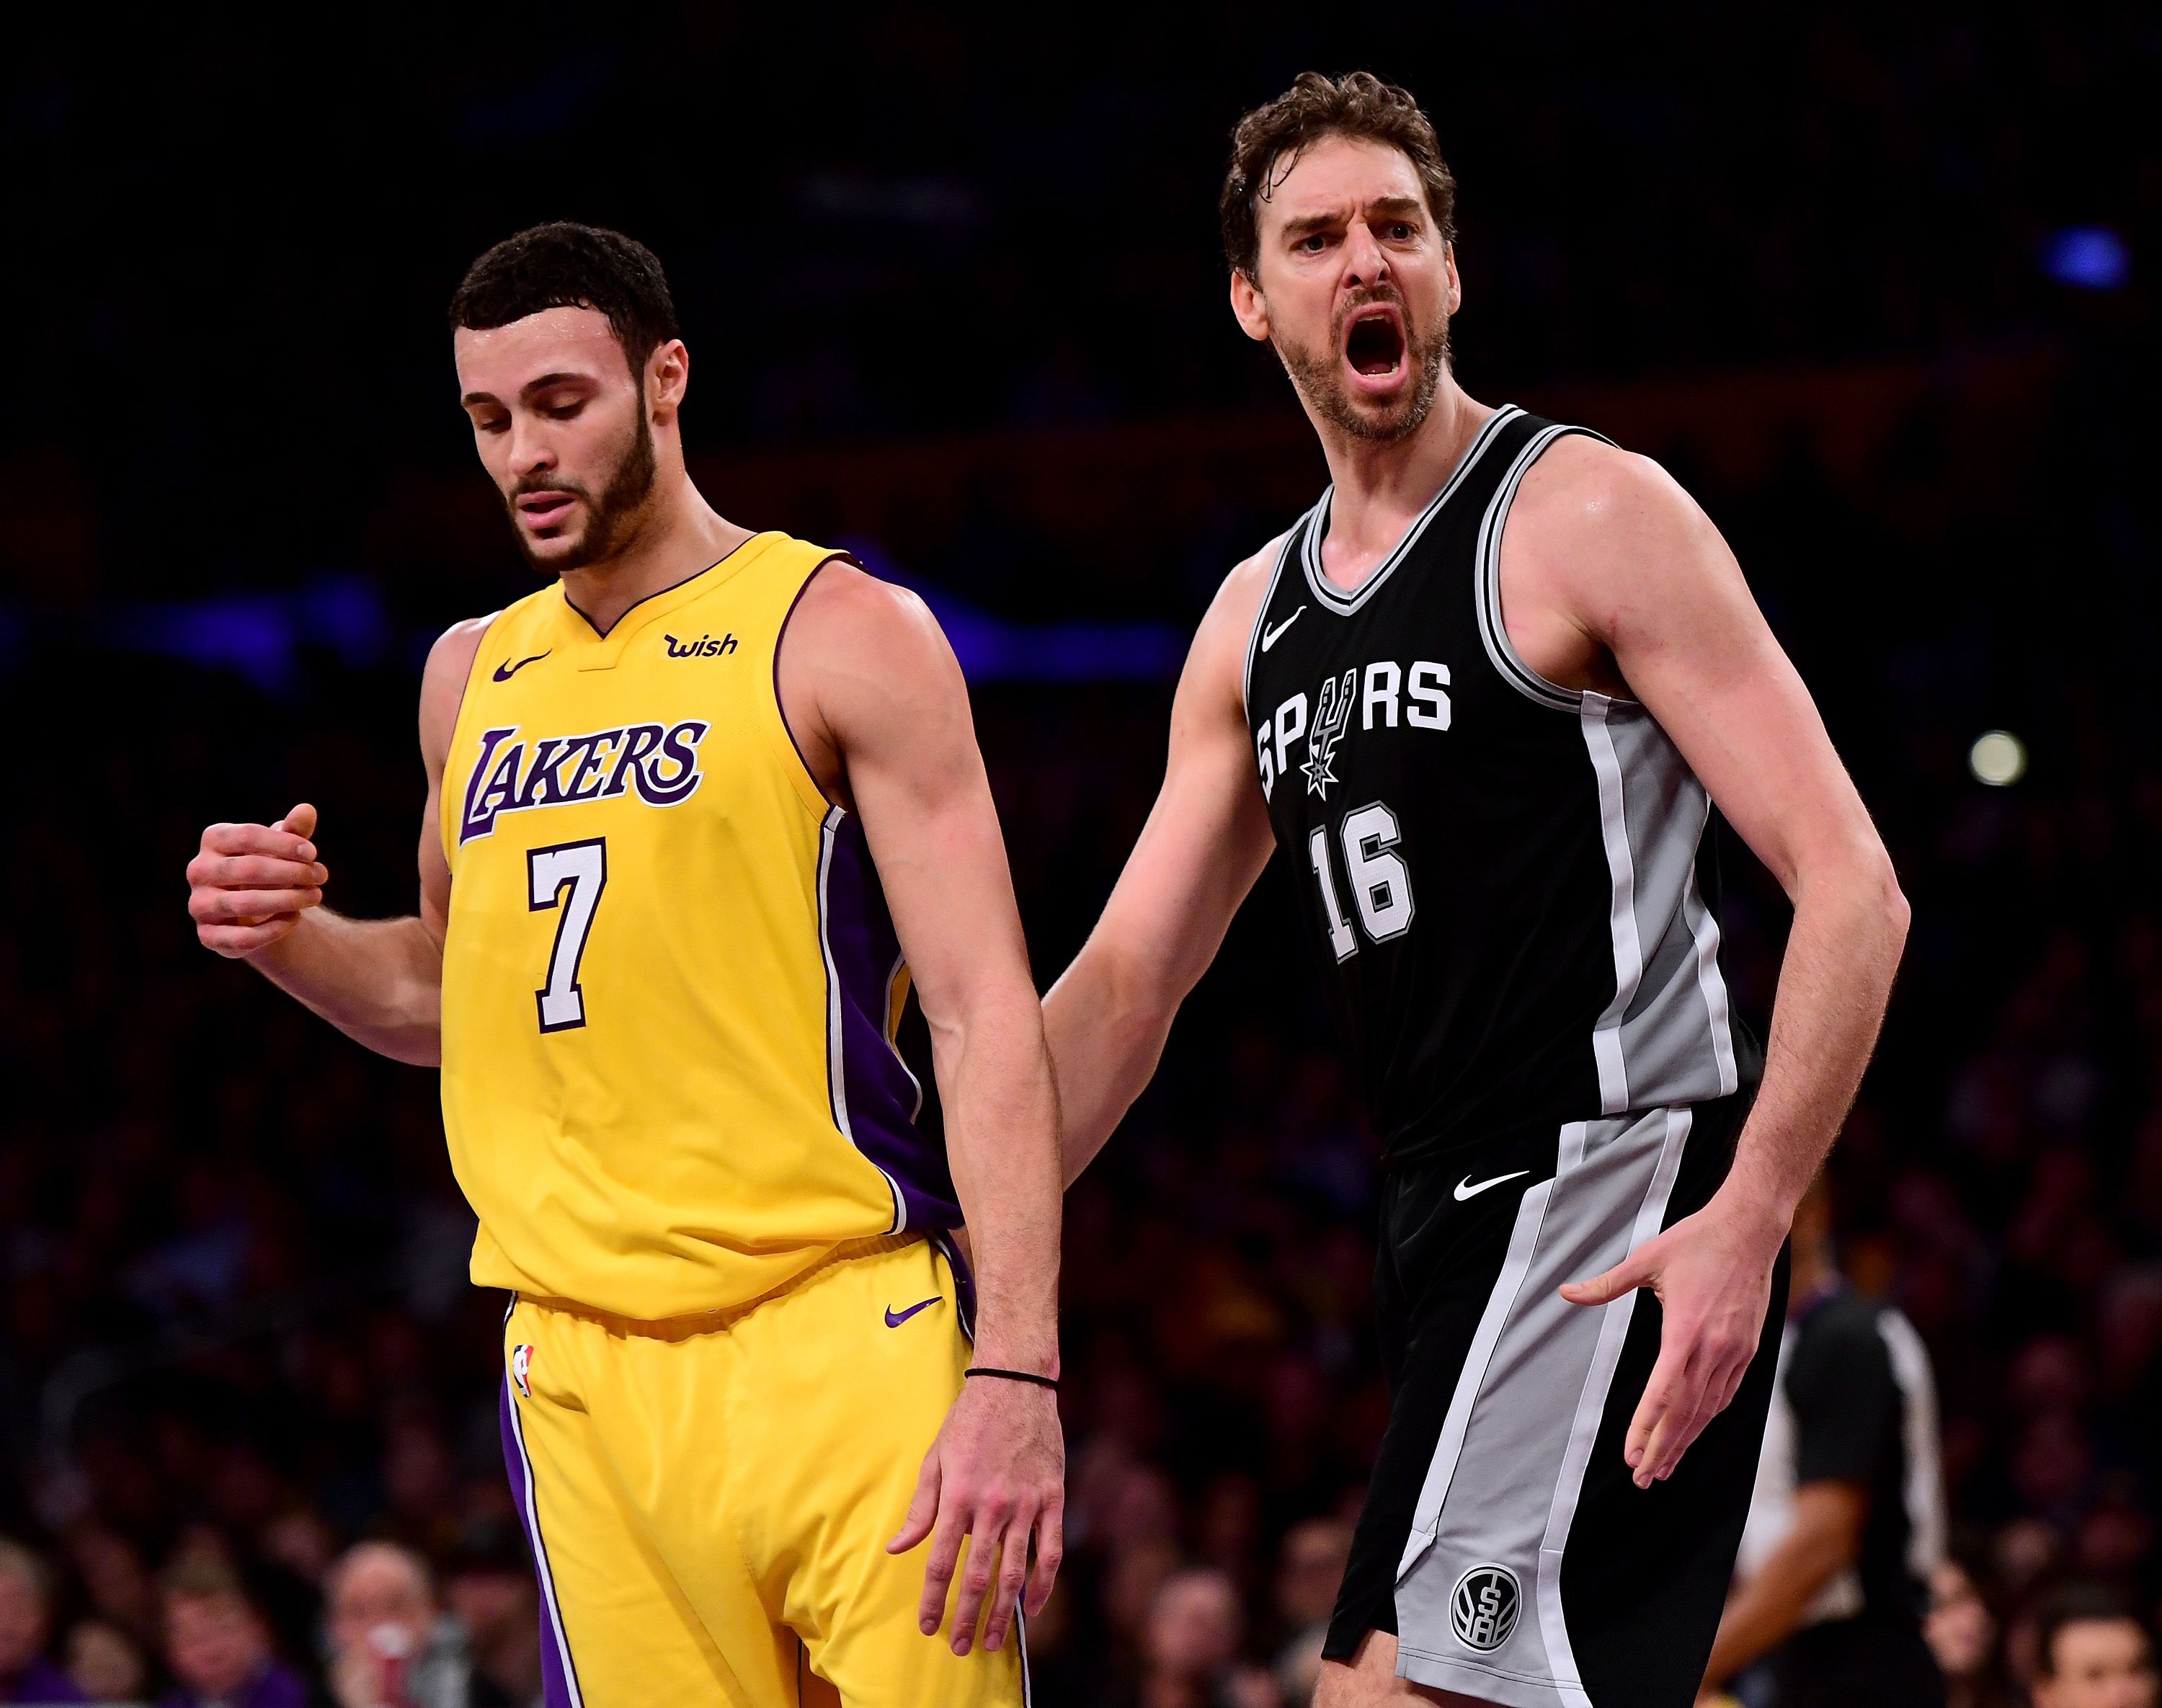 Pau Gasol talks Kobe's impact ahead of jersey retirement - Basketball  Network - Your daily dose of basketball